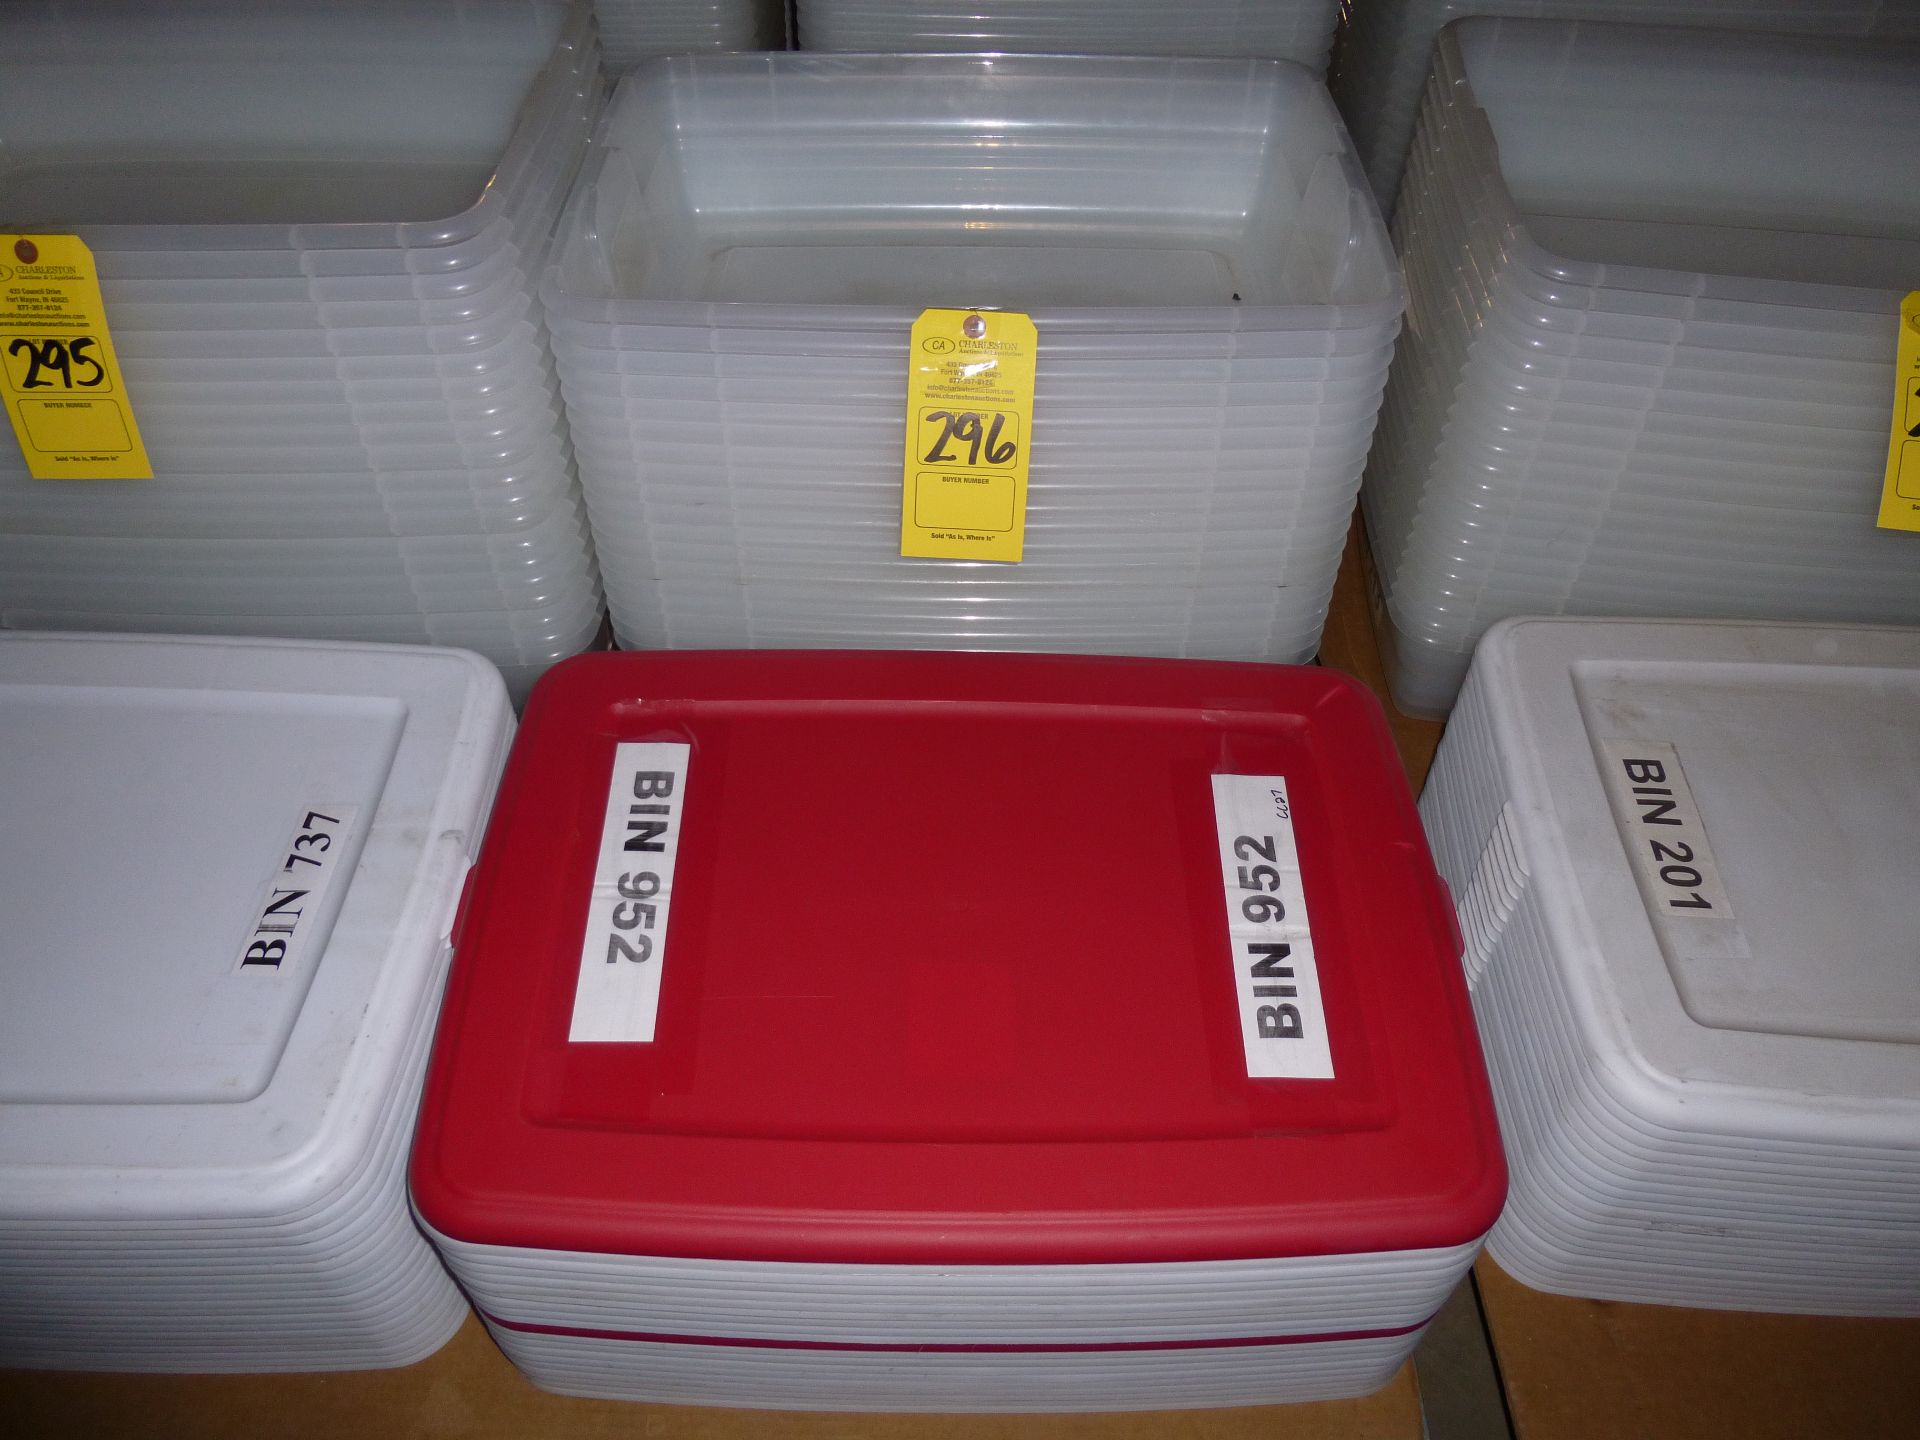 Qty 20 - storage bins 28 quart size with lids. Shipping can be prepared for either ground package or